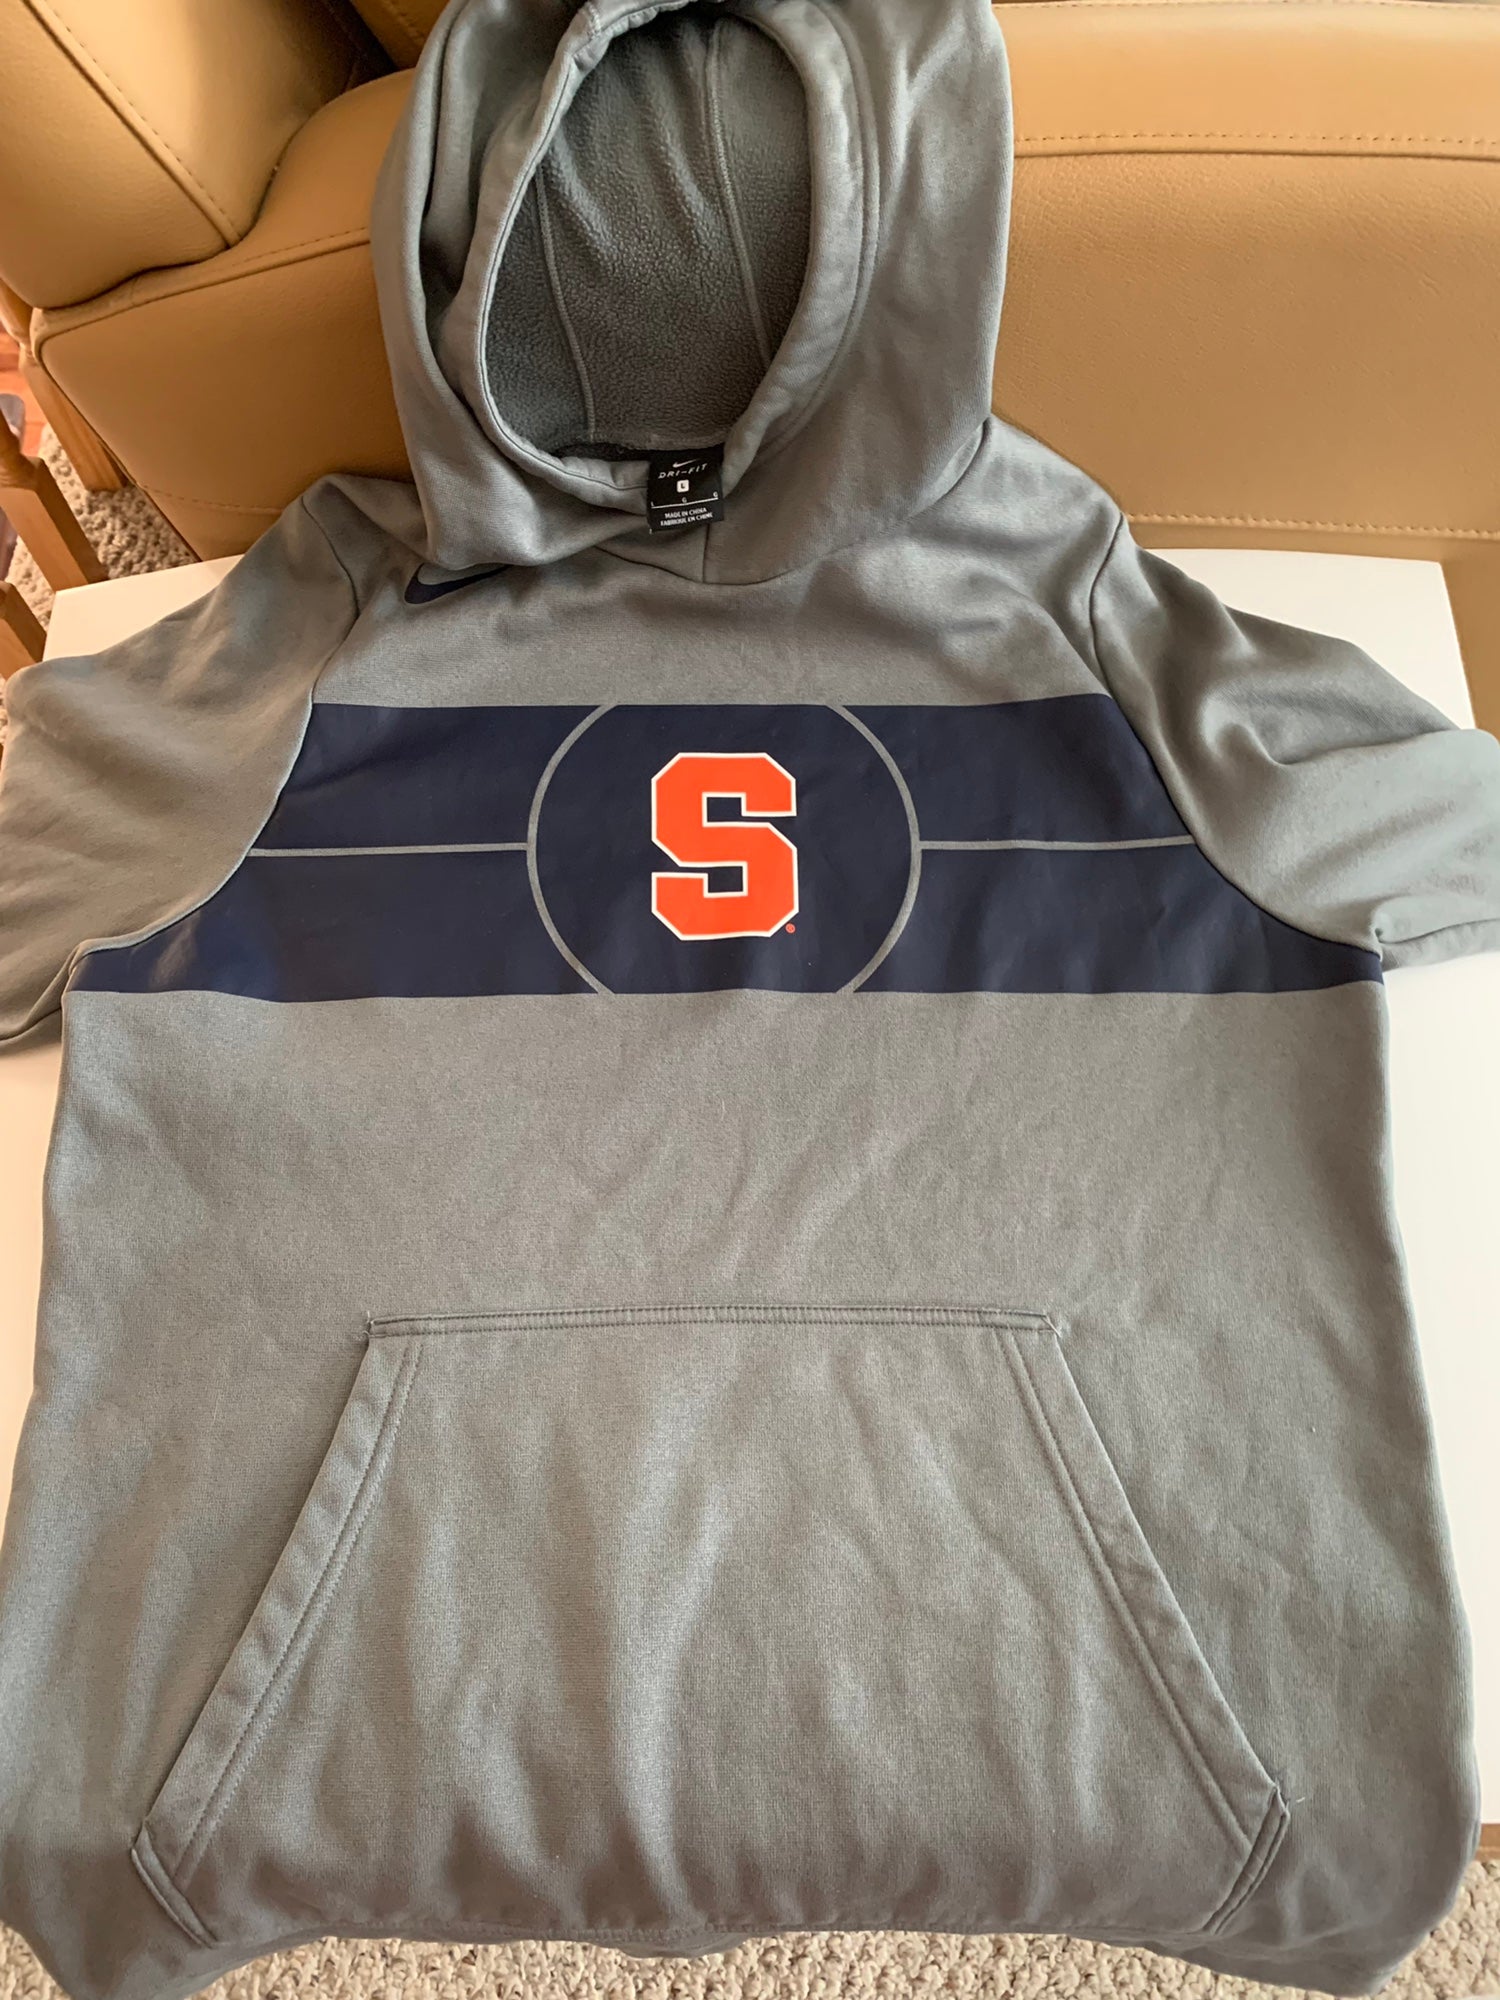 Gear up for Syracuse Orange basketball: Where to buy new hoodies, jerseys,  Nike apparel online 